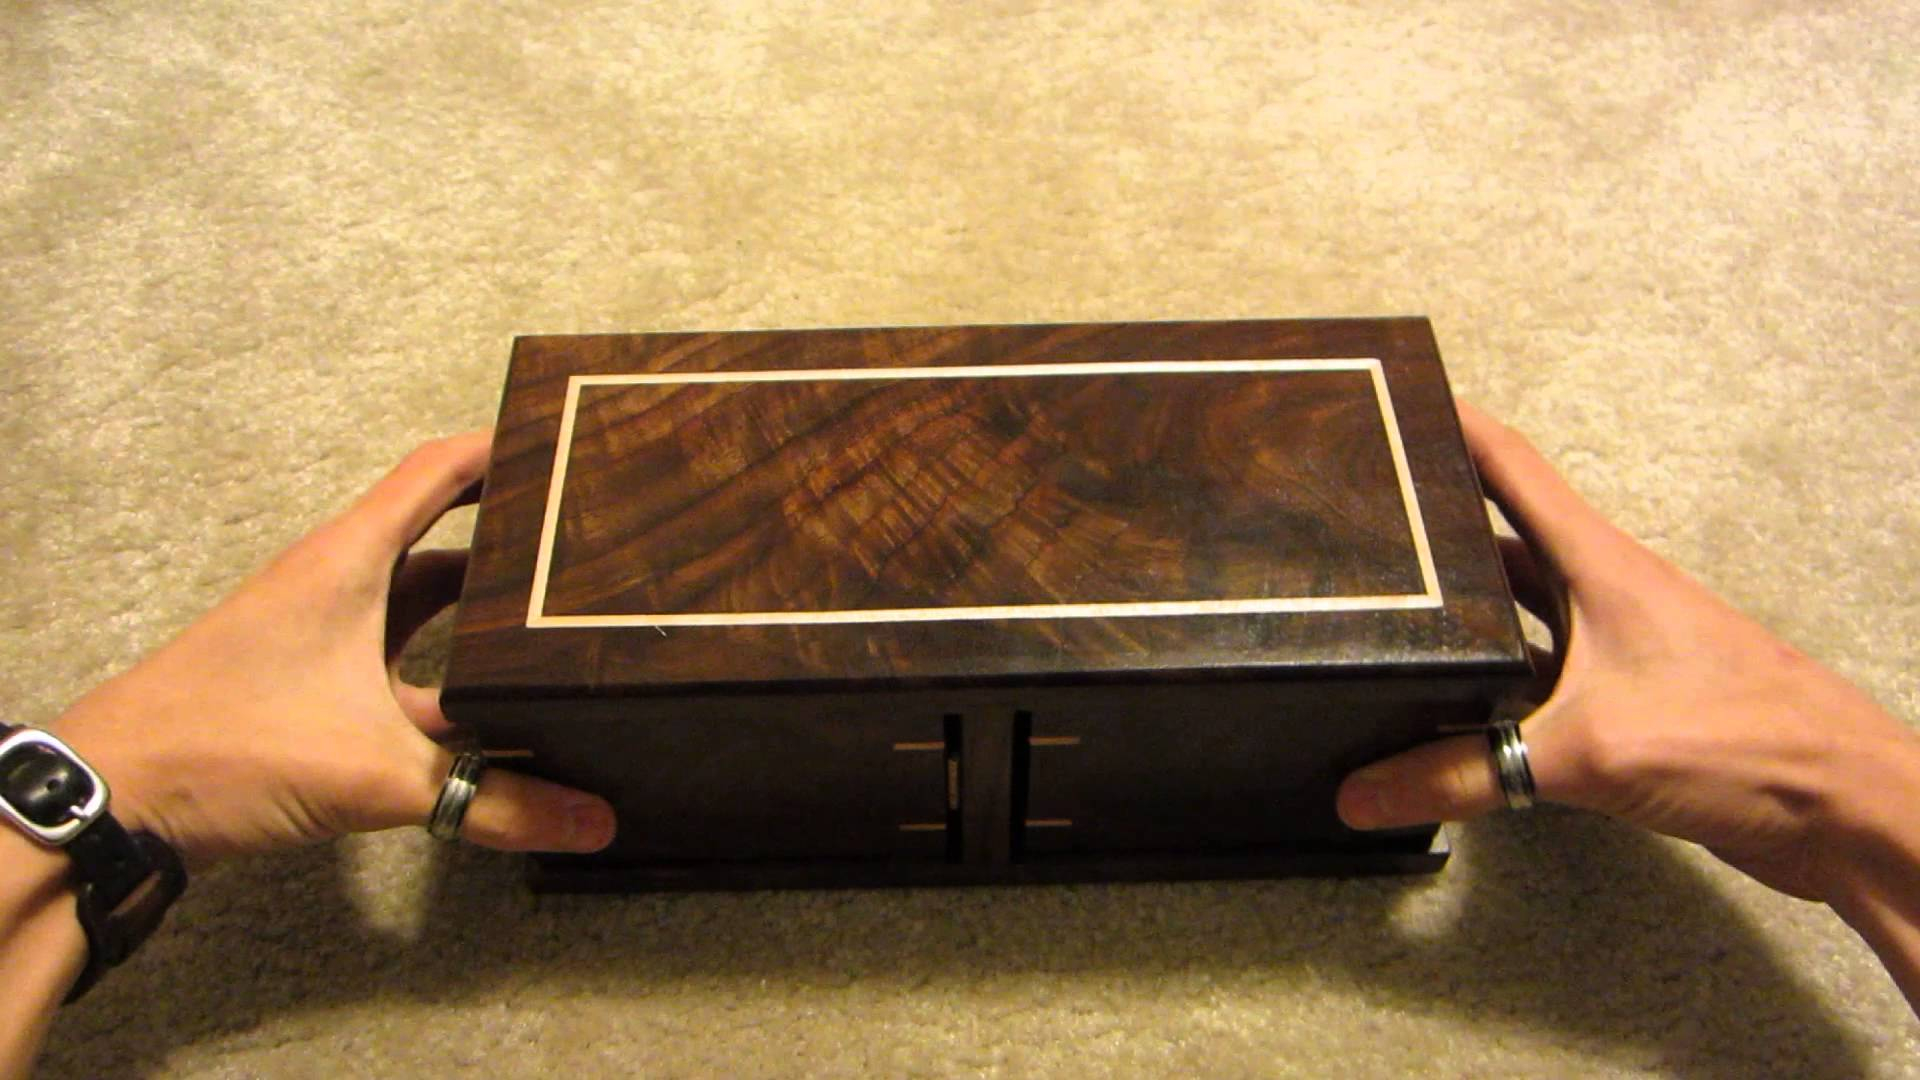 Mtg Unboxing Custom Switchblade Deck Box Made Aaron Cain Demi throughout sizing 1920 X 1080